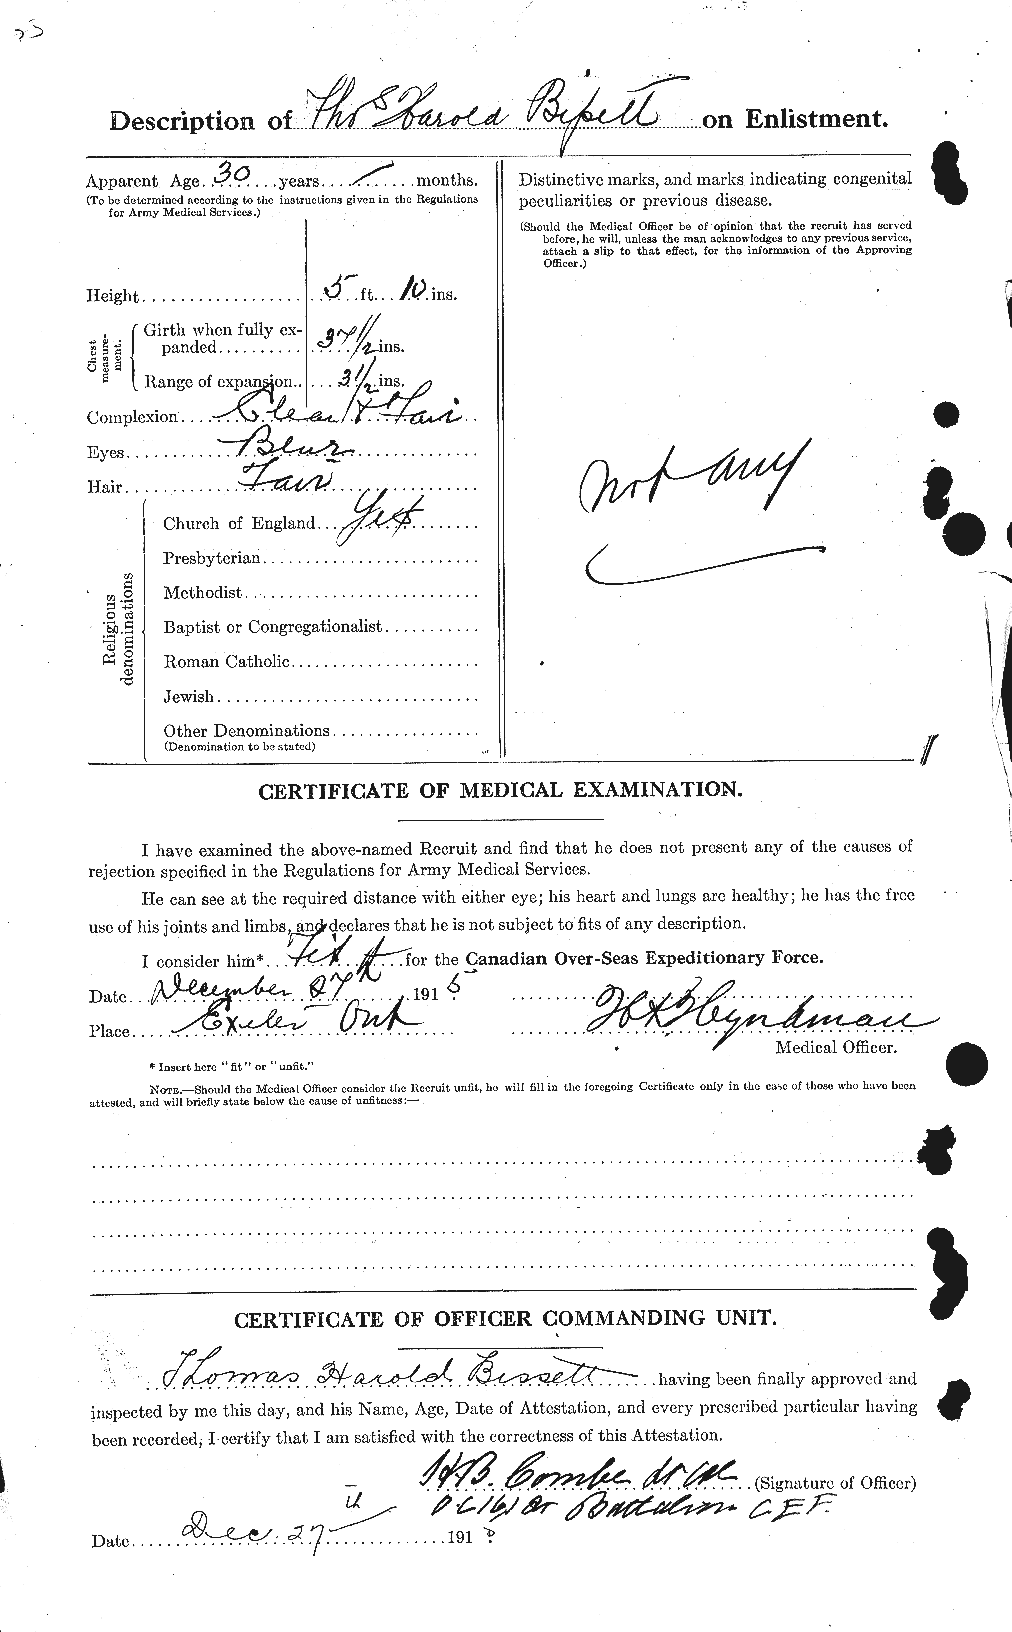 Personnel Records of the First World War - CEF 246103b